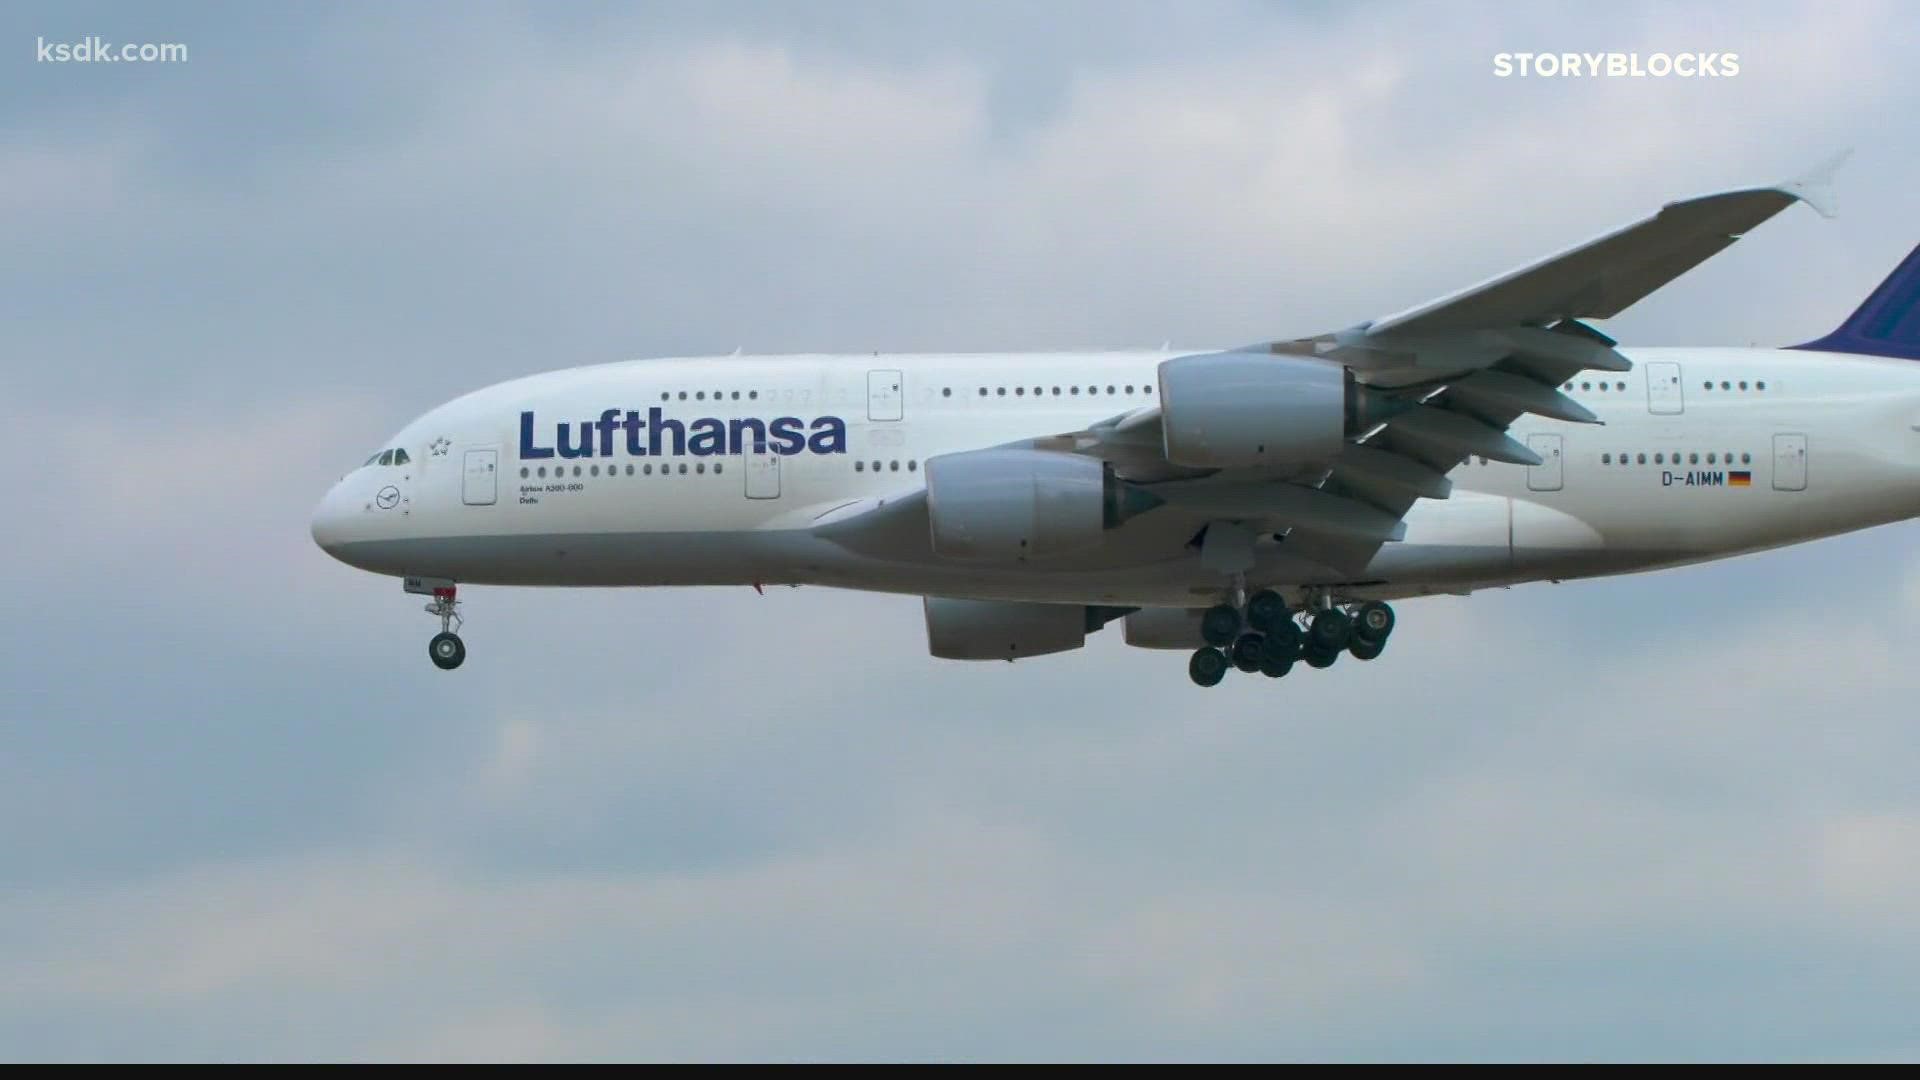 St. Louis area leaders announced Lufthansa will offer nonstop flights from St. Louis Lambert International Airport to Frankfurt, Germany starting in June 2022.